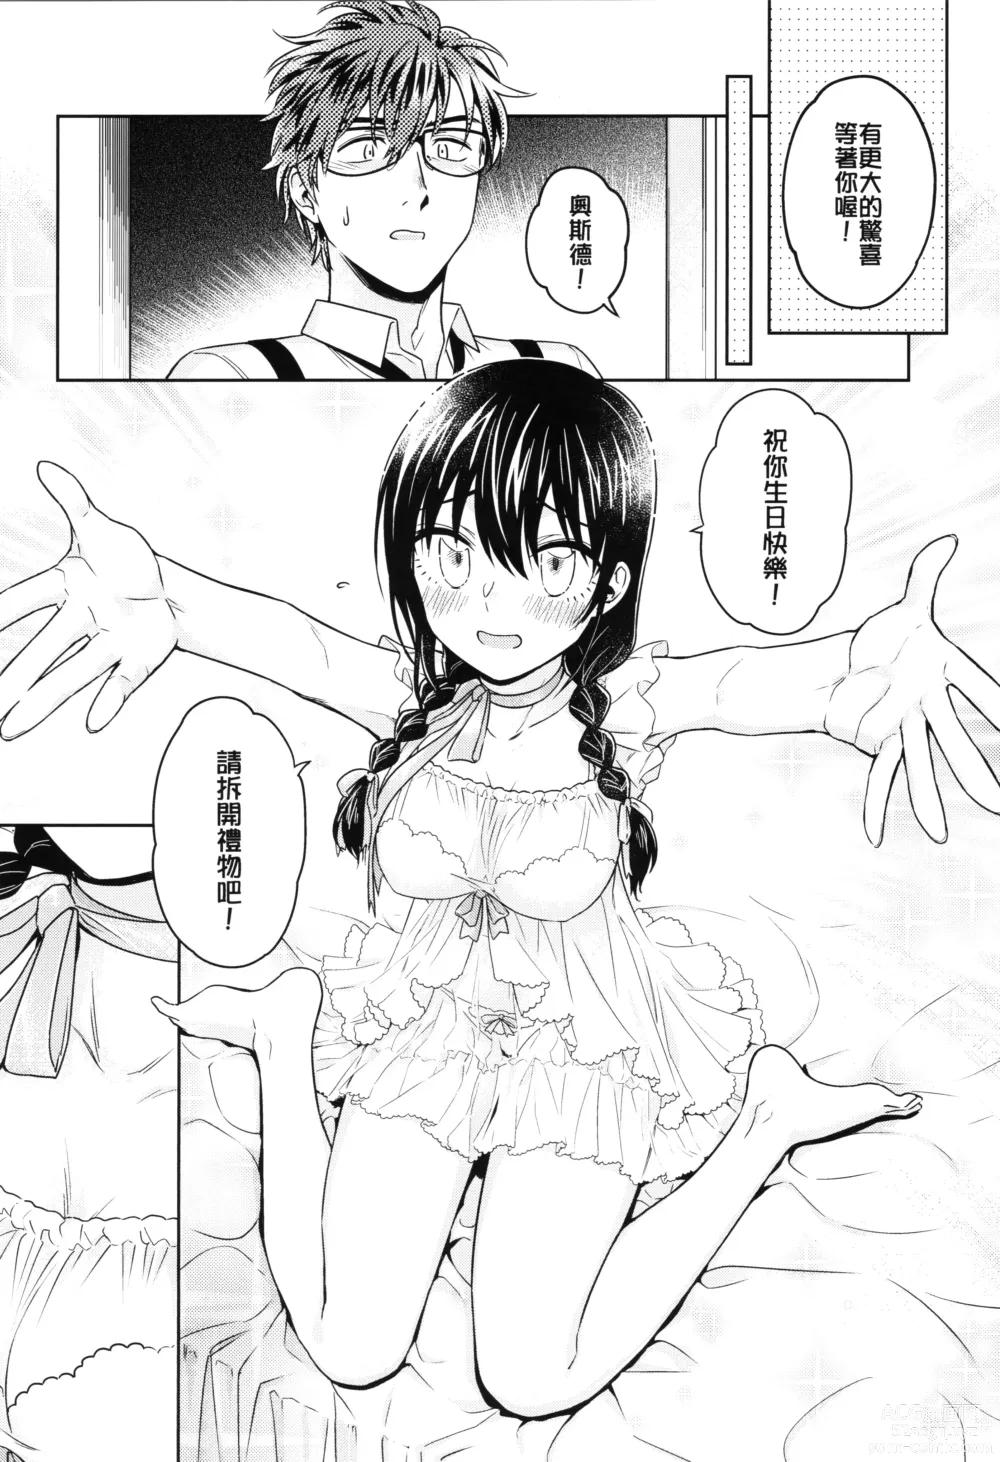 Page 3 of doujinshi My Dear Gift